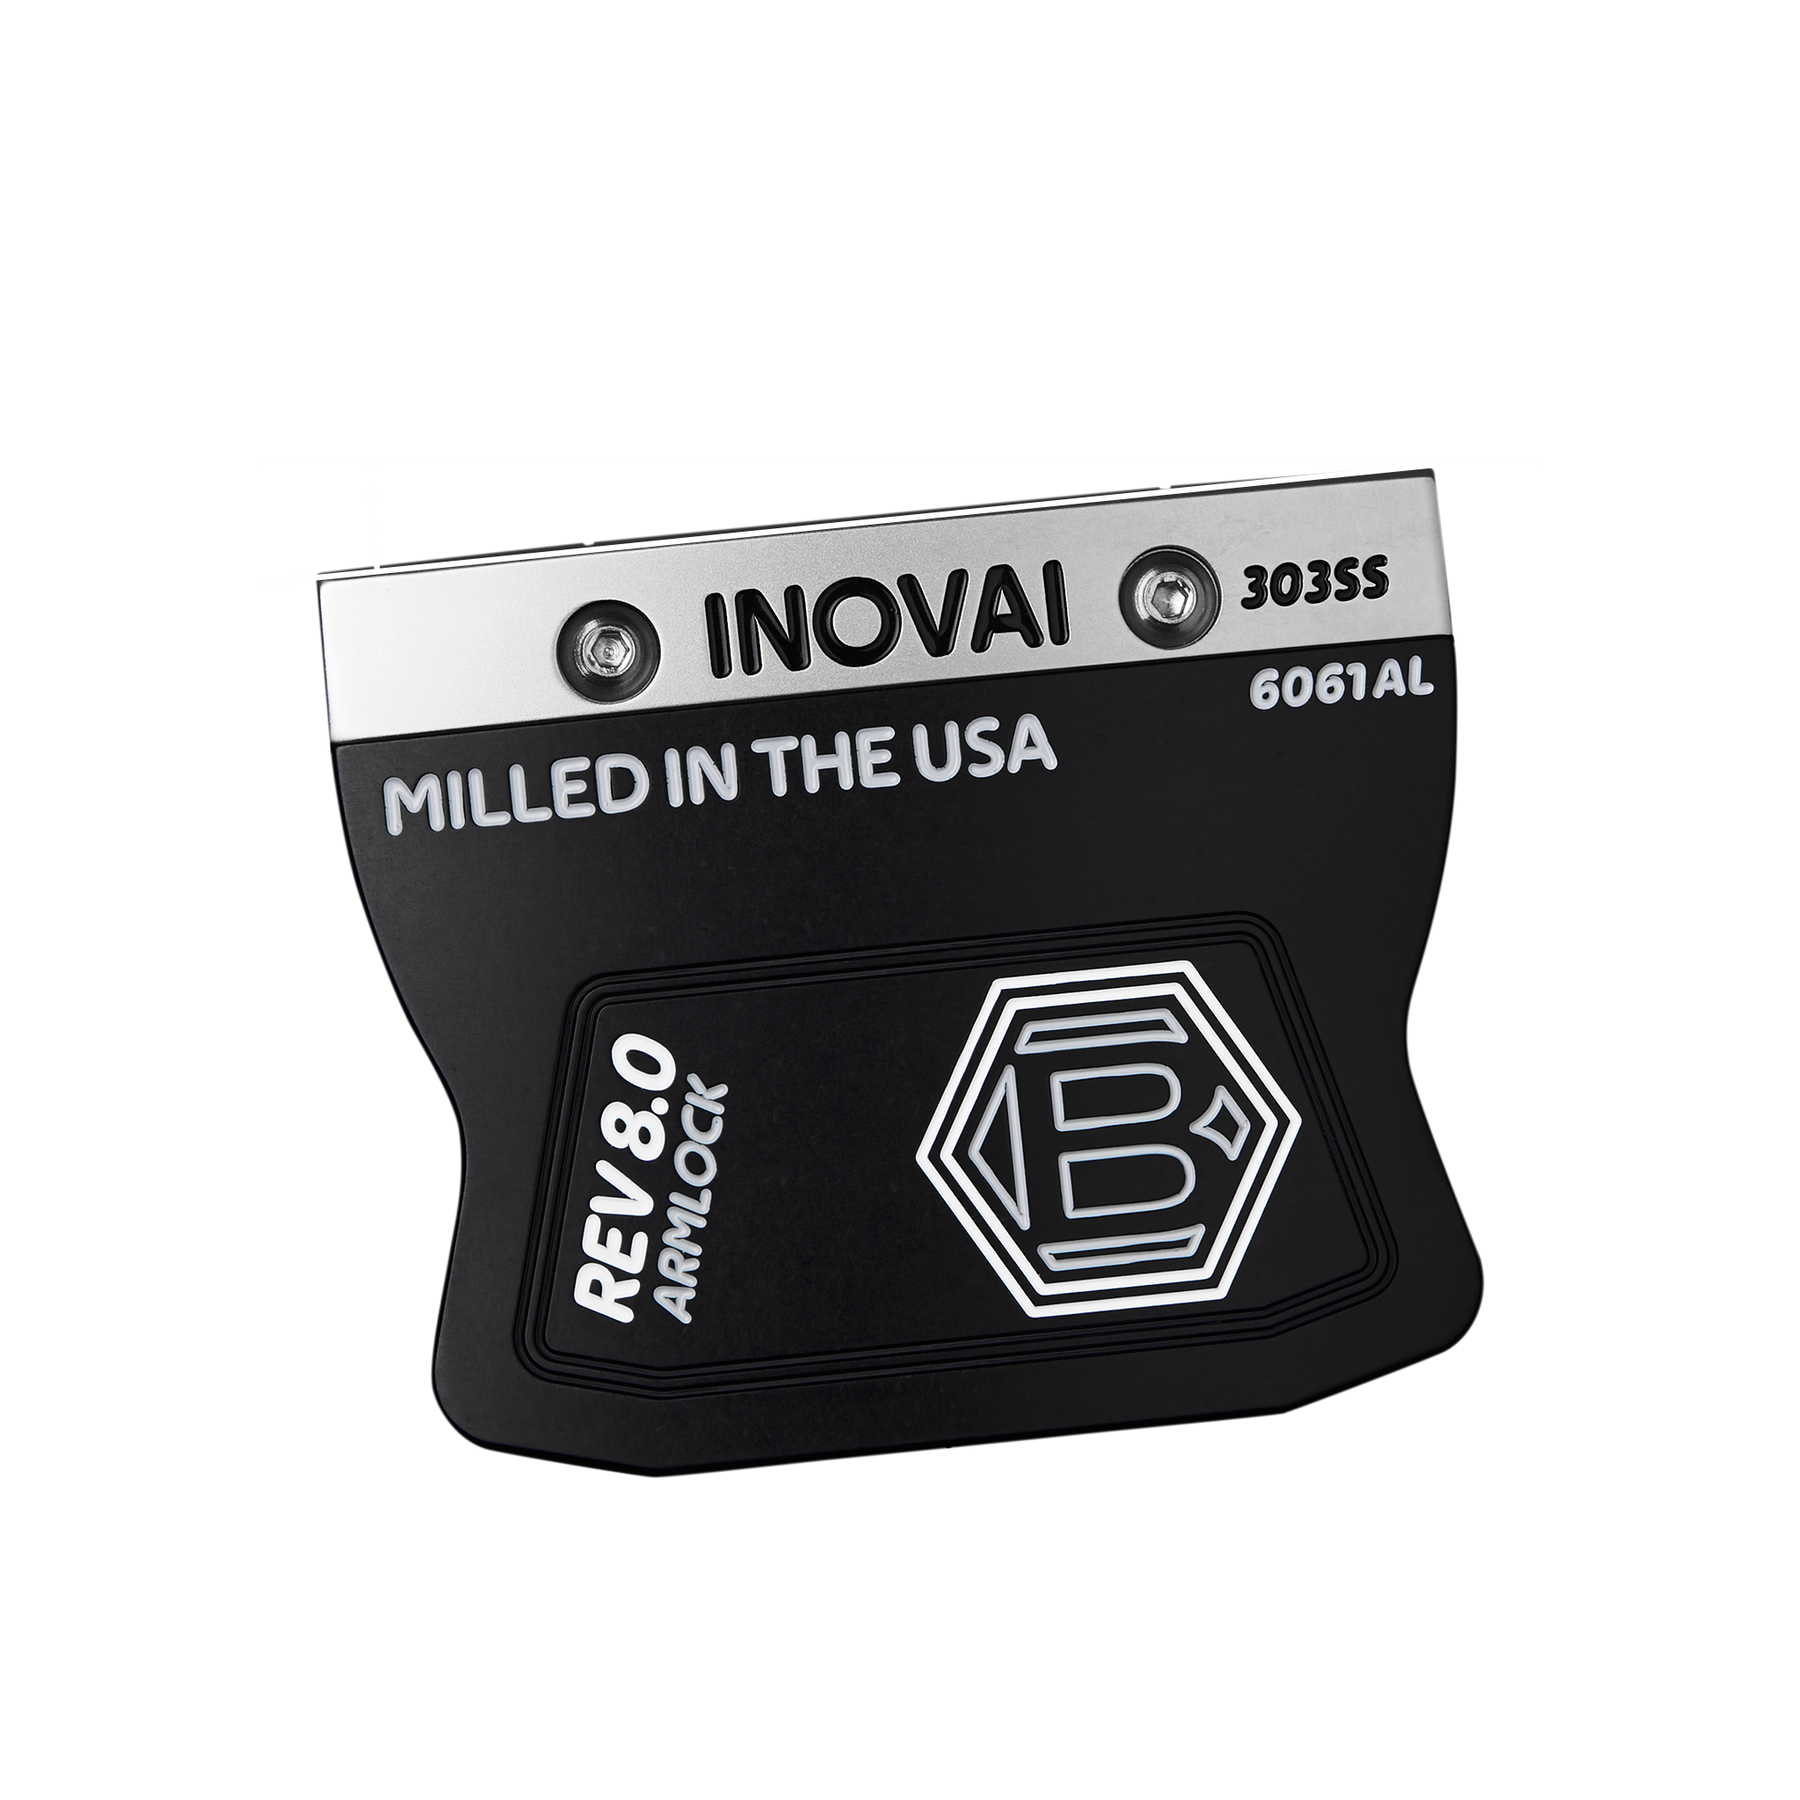 2022 INOVAI 8.0 Armlock Putter | Discover Yours Today! – Studio B